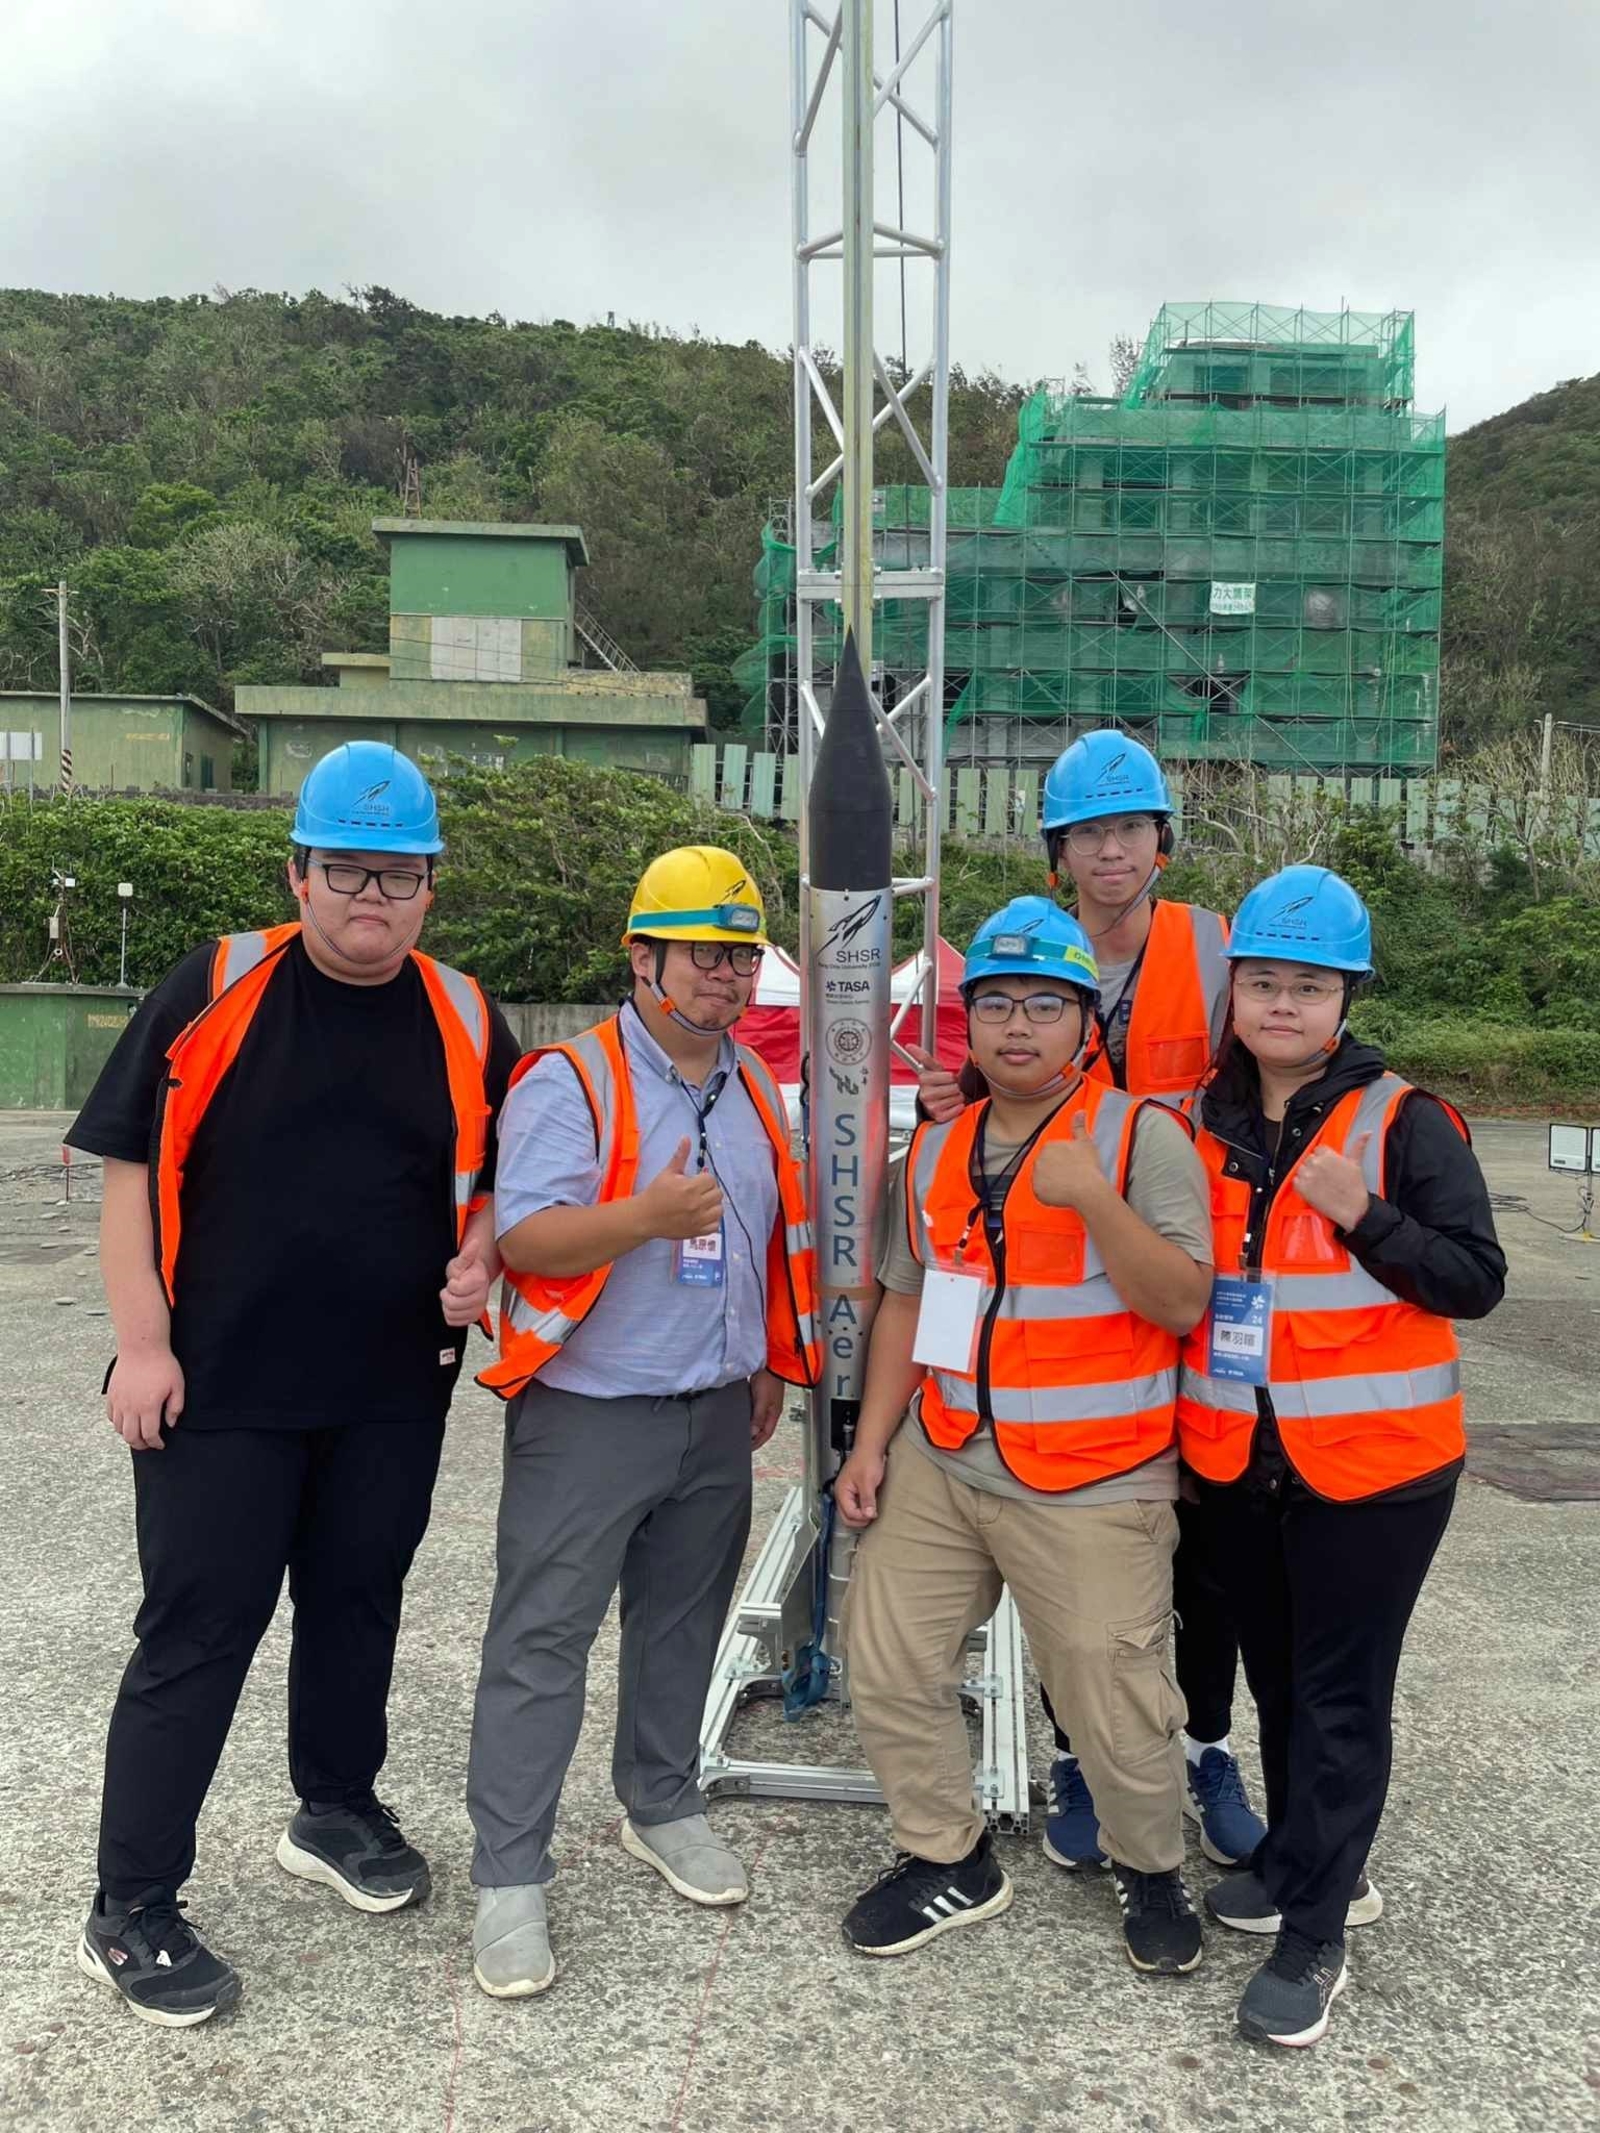 The initial involvement of a private university of science and technology in sounding rocket launched, where Dr. Yen-Huai Ma and his students from the Department of Electronic Engineering fulfilled their space dreams.